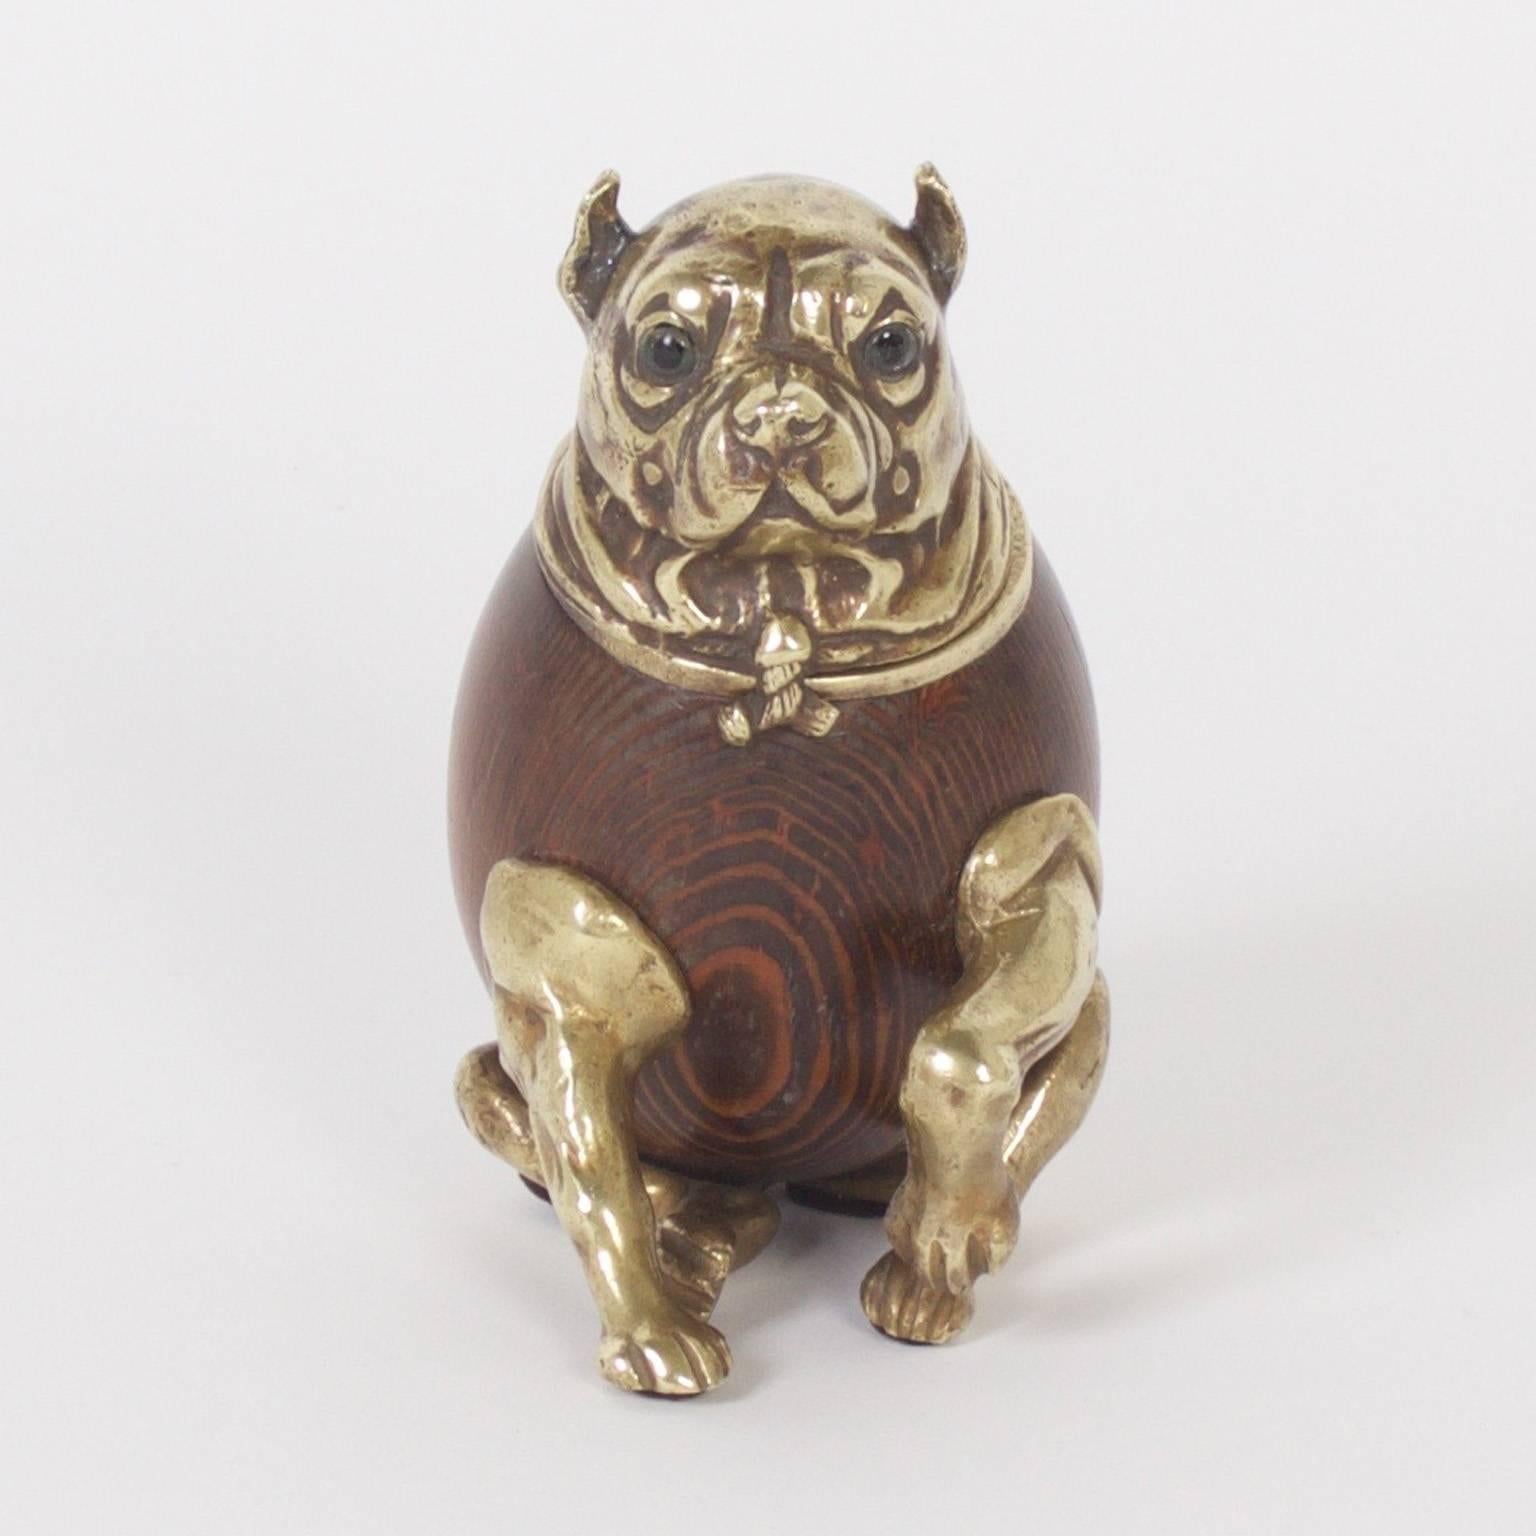 Humorous Mid-Century dog that is a hinged box. Crafted with cast brass and turned wood with glass eyes. This plump canine could be a pug or a bulldog and is ready to give his paw. Signed 